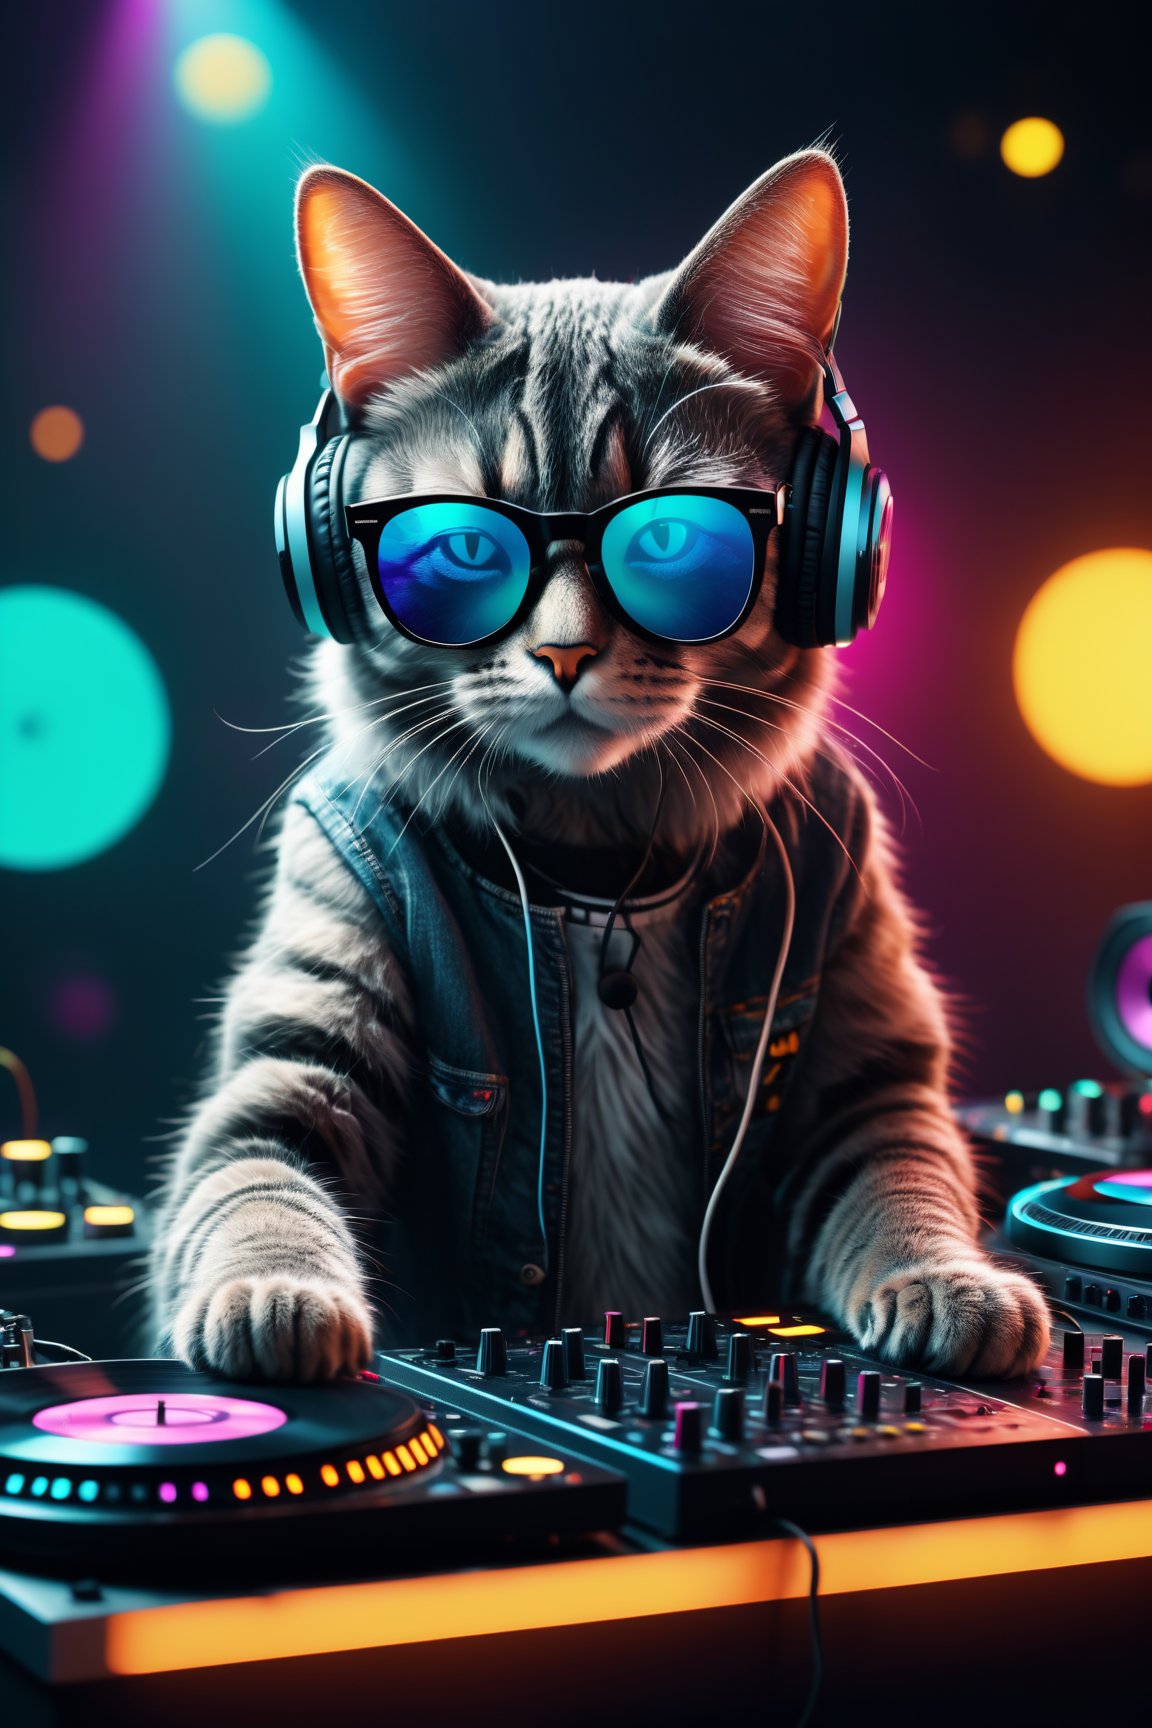 8k uhd rtx on cinematic artistic photoreal best quality high resolution, A Cat DJ, wearing sunglasses and headphones, working the turntables as a DJ